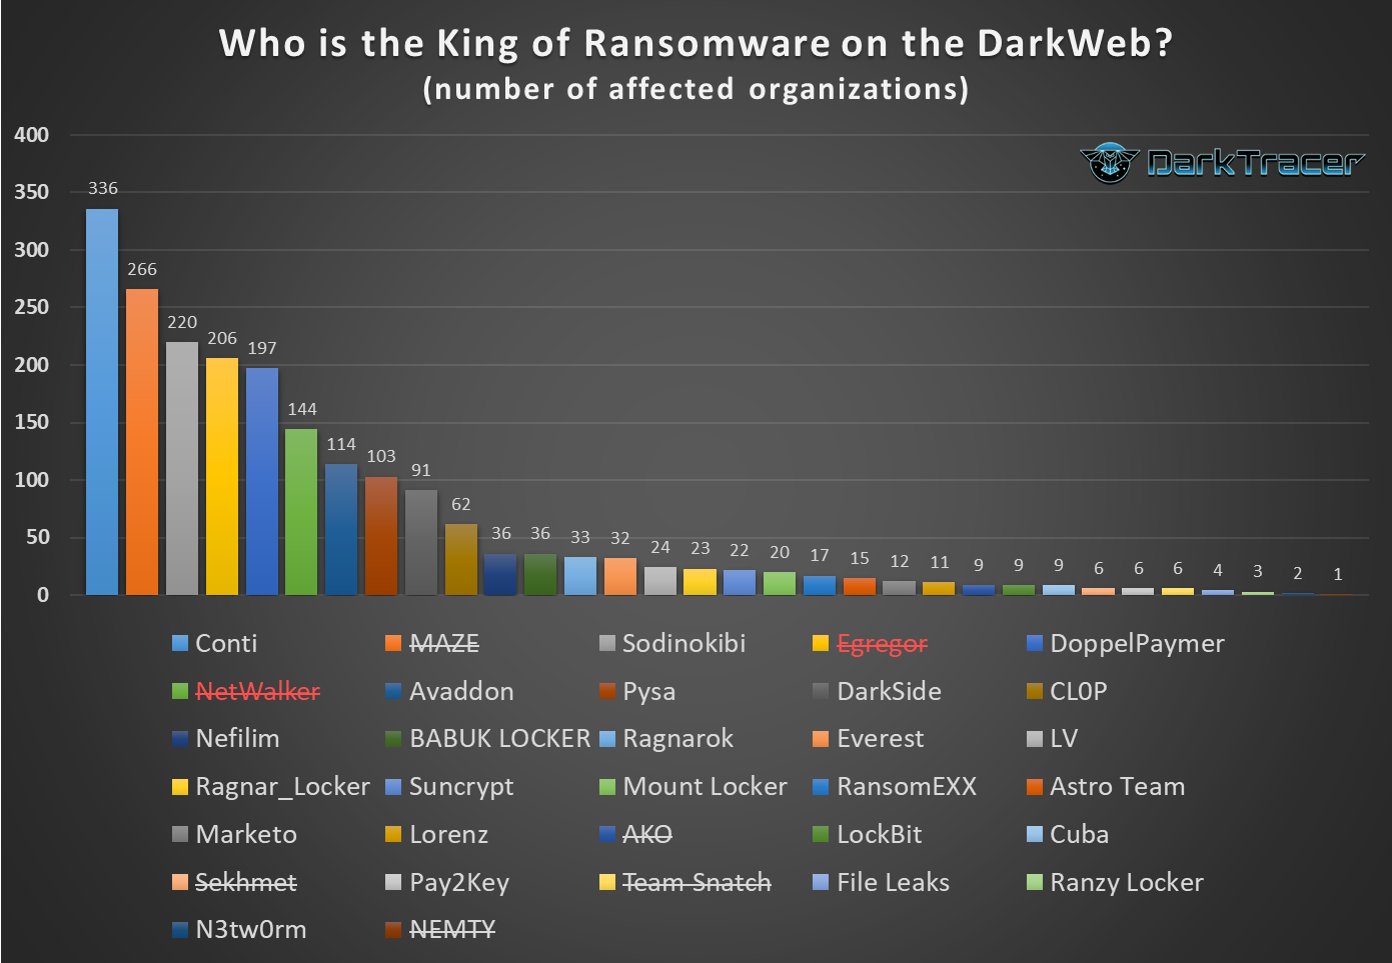 Who is King of Ransomware on the Dark Web?